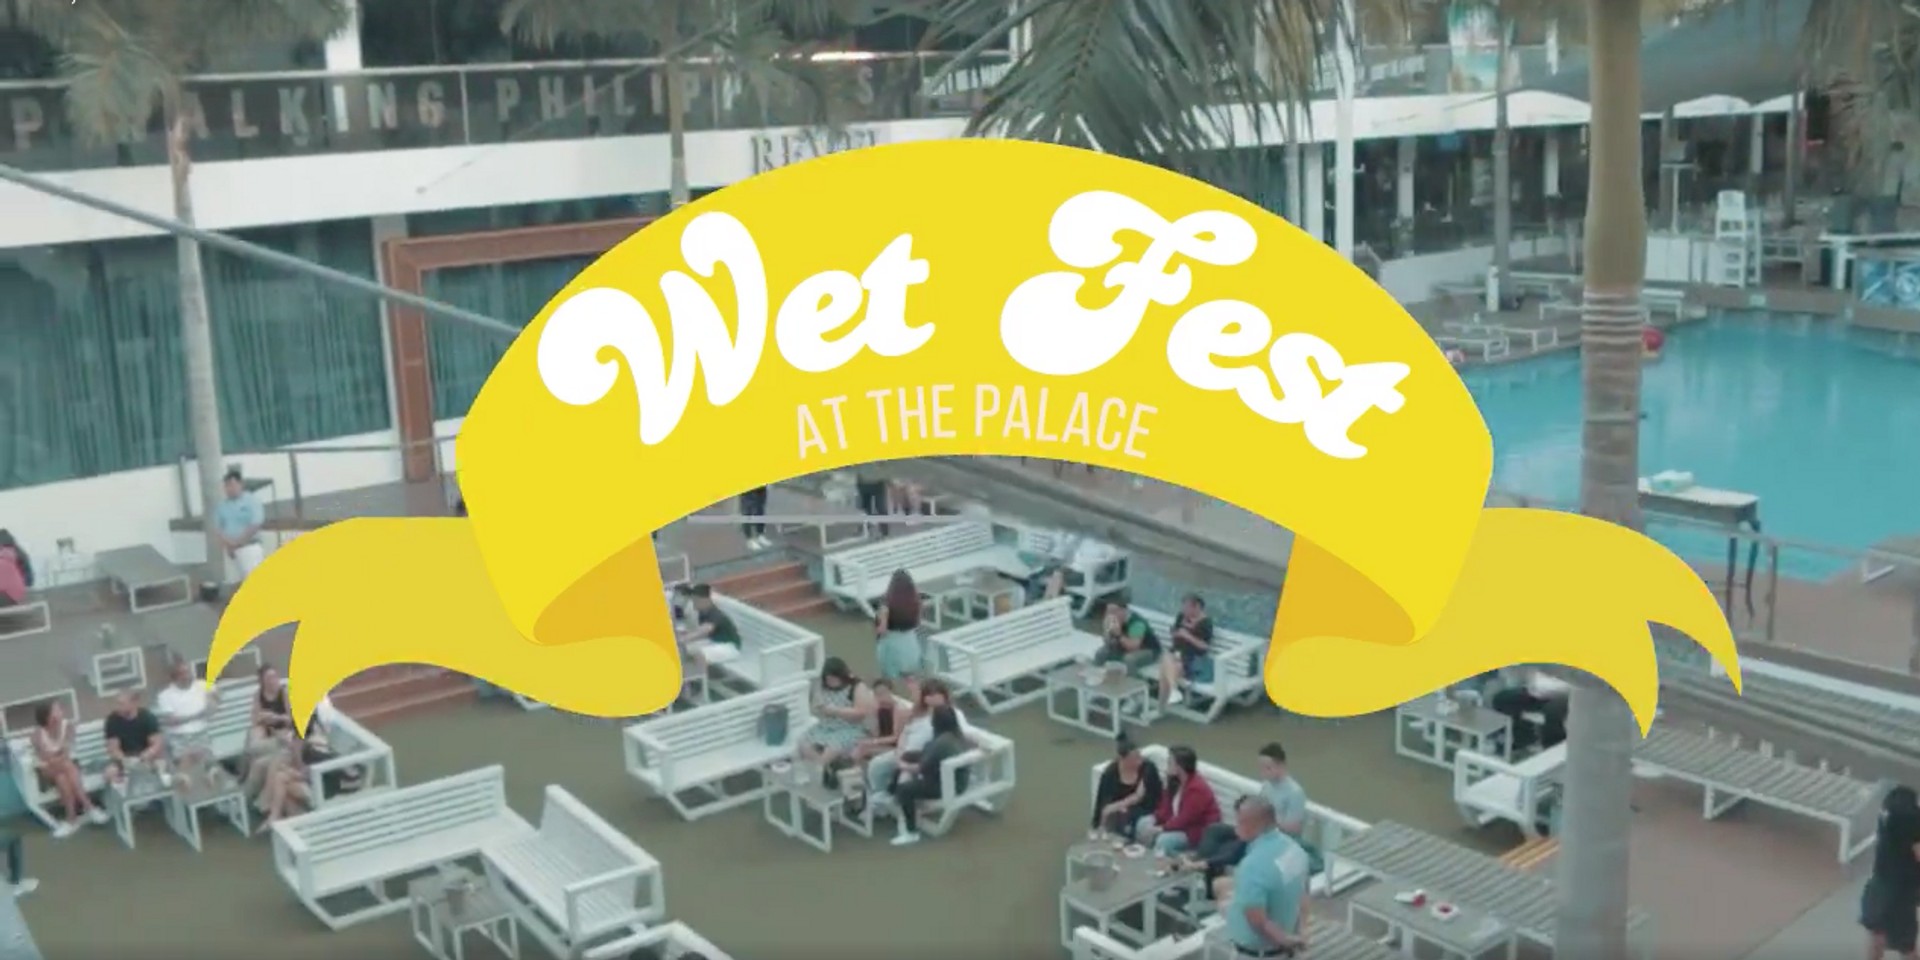 WATCH: Apartel, Sinosikat?, Tom's Story and more indie acts take over the Palace Pool Club for Homonym's Wet Fest 3.0 